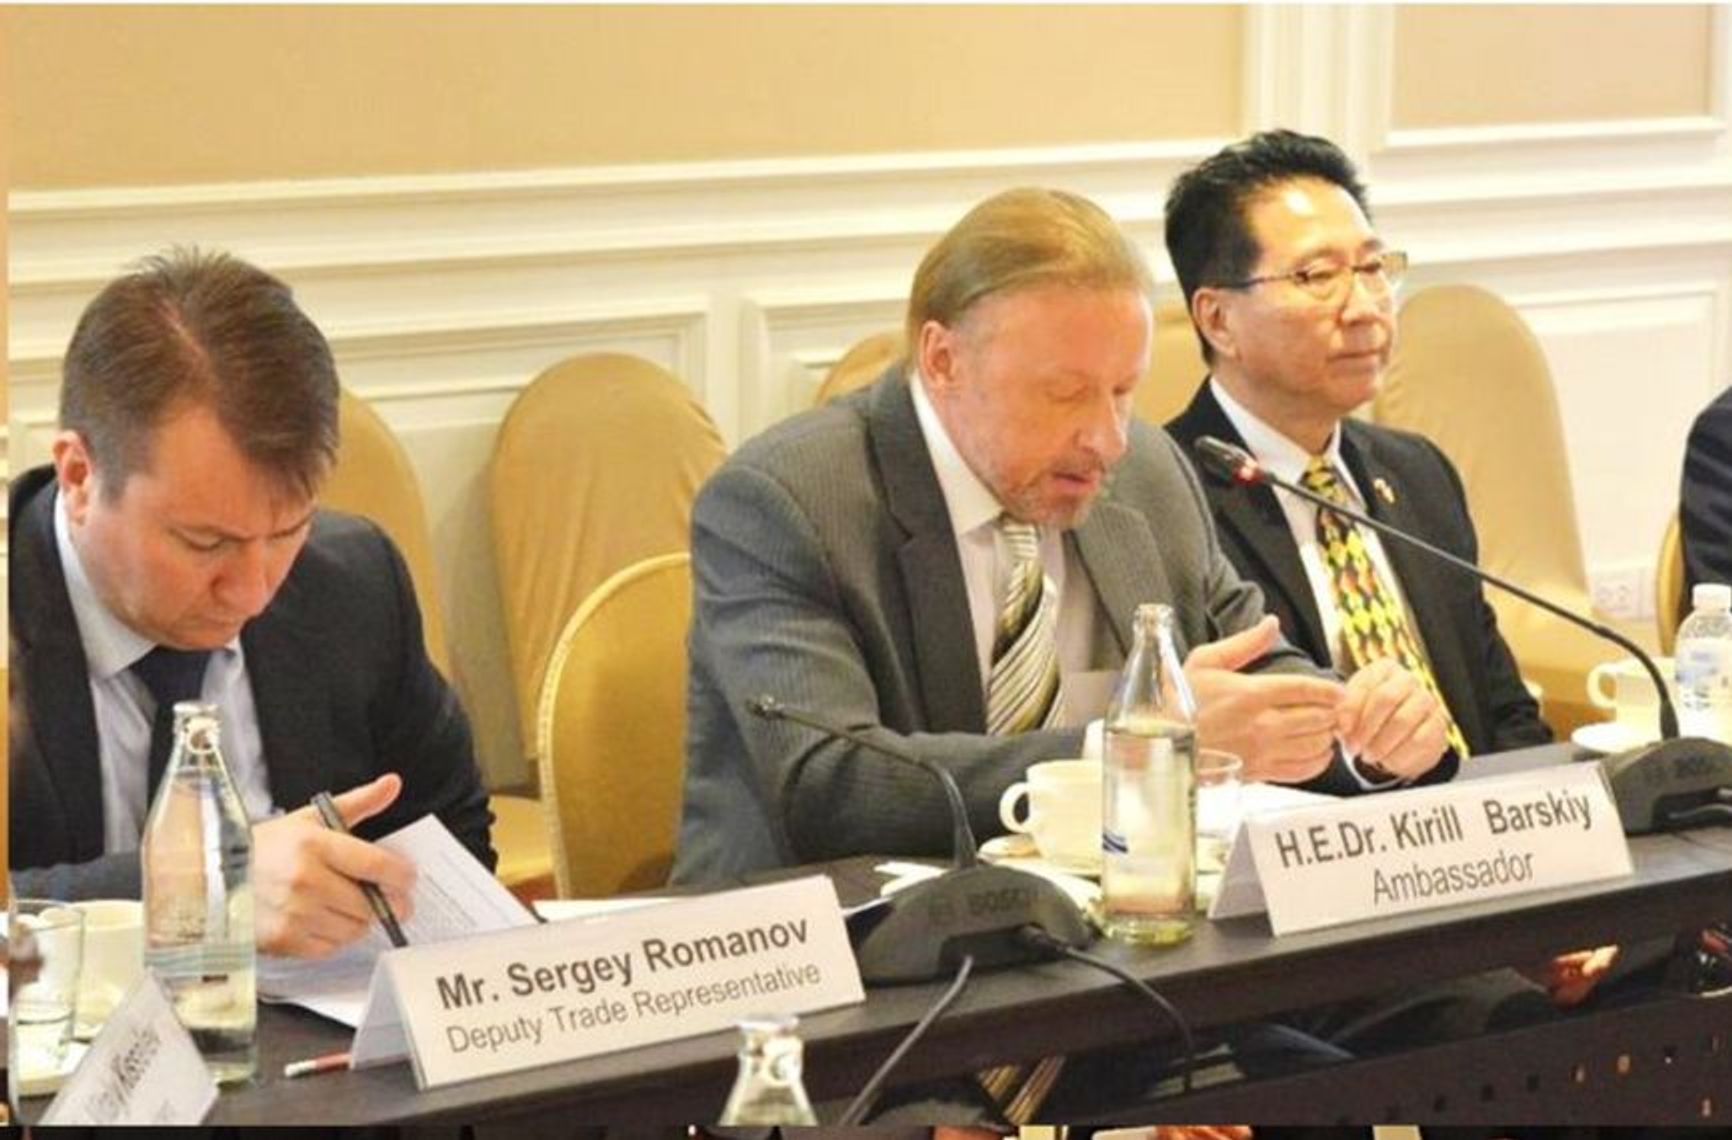 Sergey Romanov attending Thai-Russia Chamber of Commerece session in Bangkok, Thailand, in 2016. Photo by the Thai-Russia Chamber of Commerce.